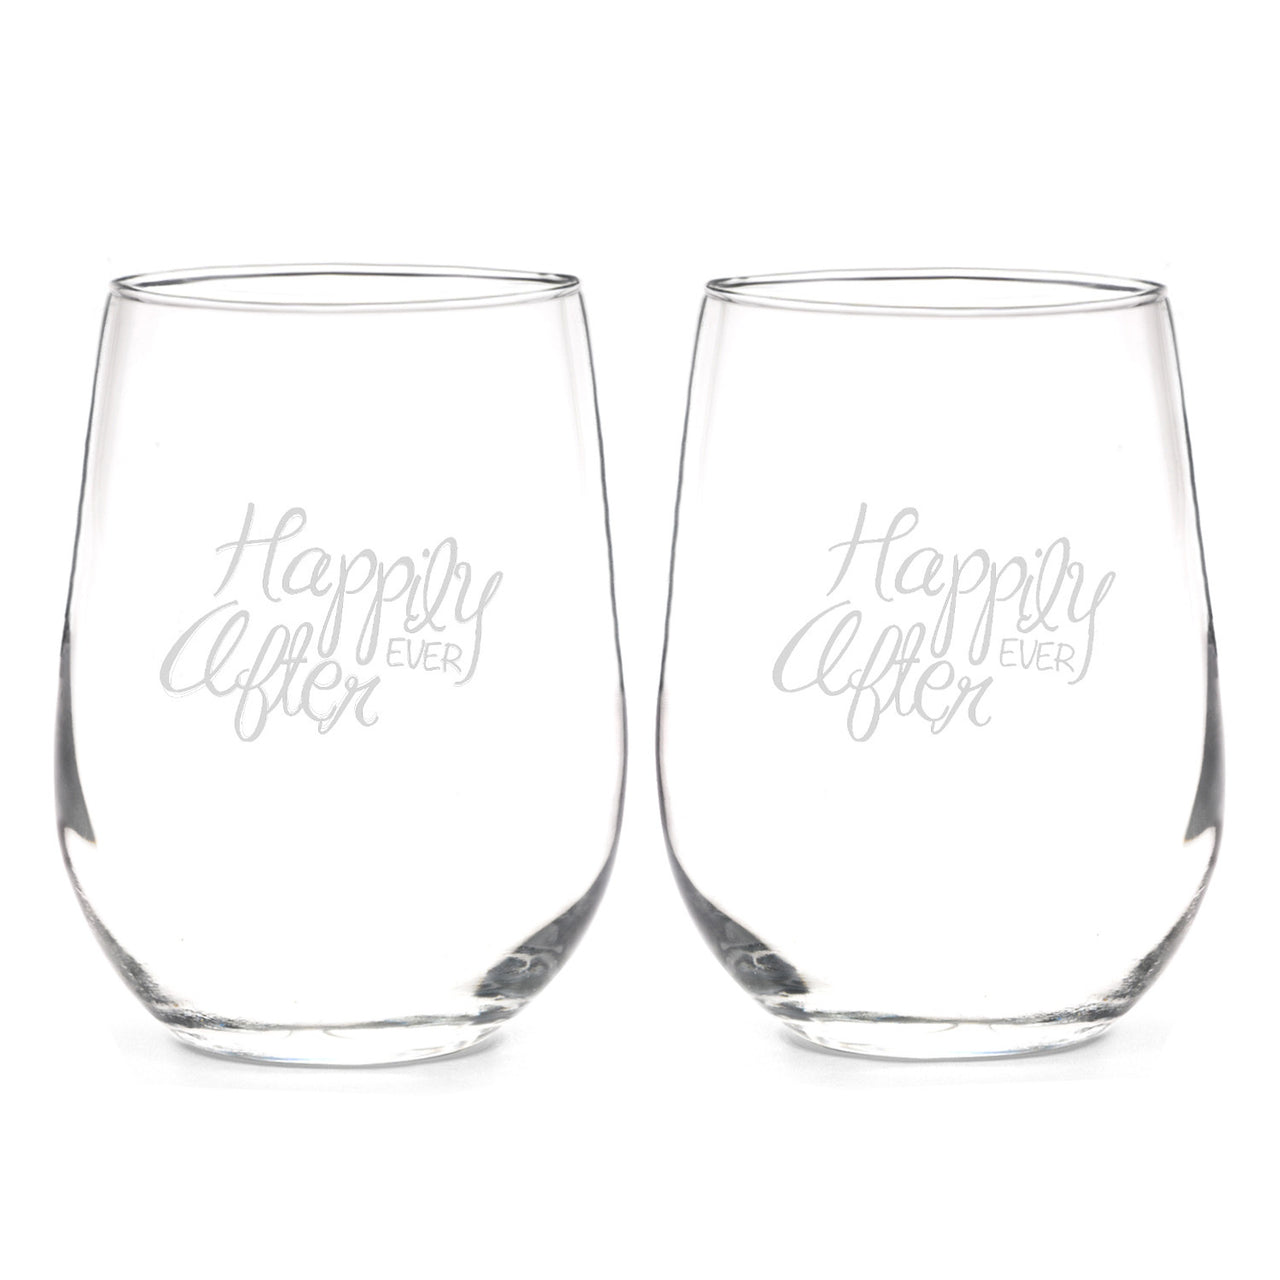 Happily Ever After Stemless Wine Glass Set - Main Image | My Wedding Favors